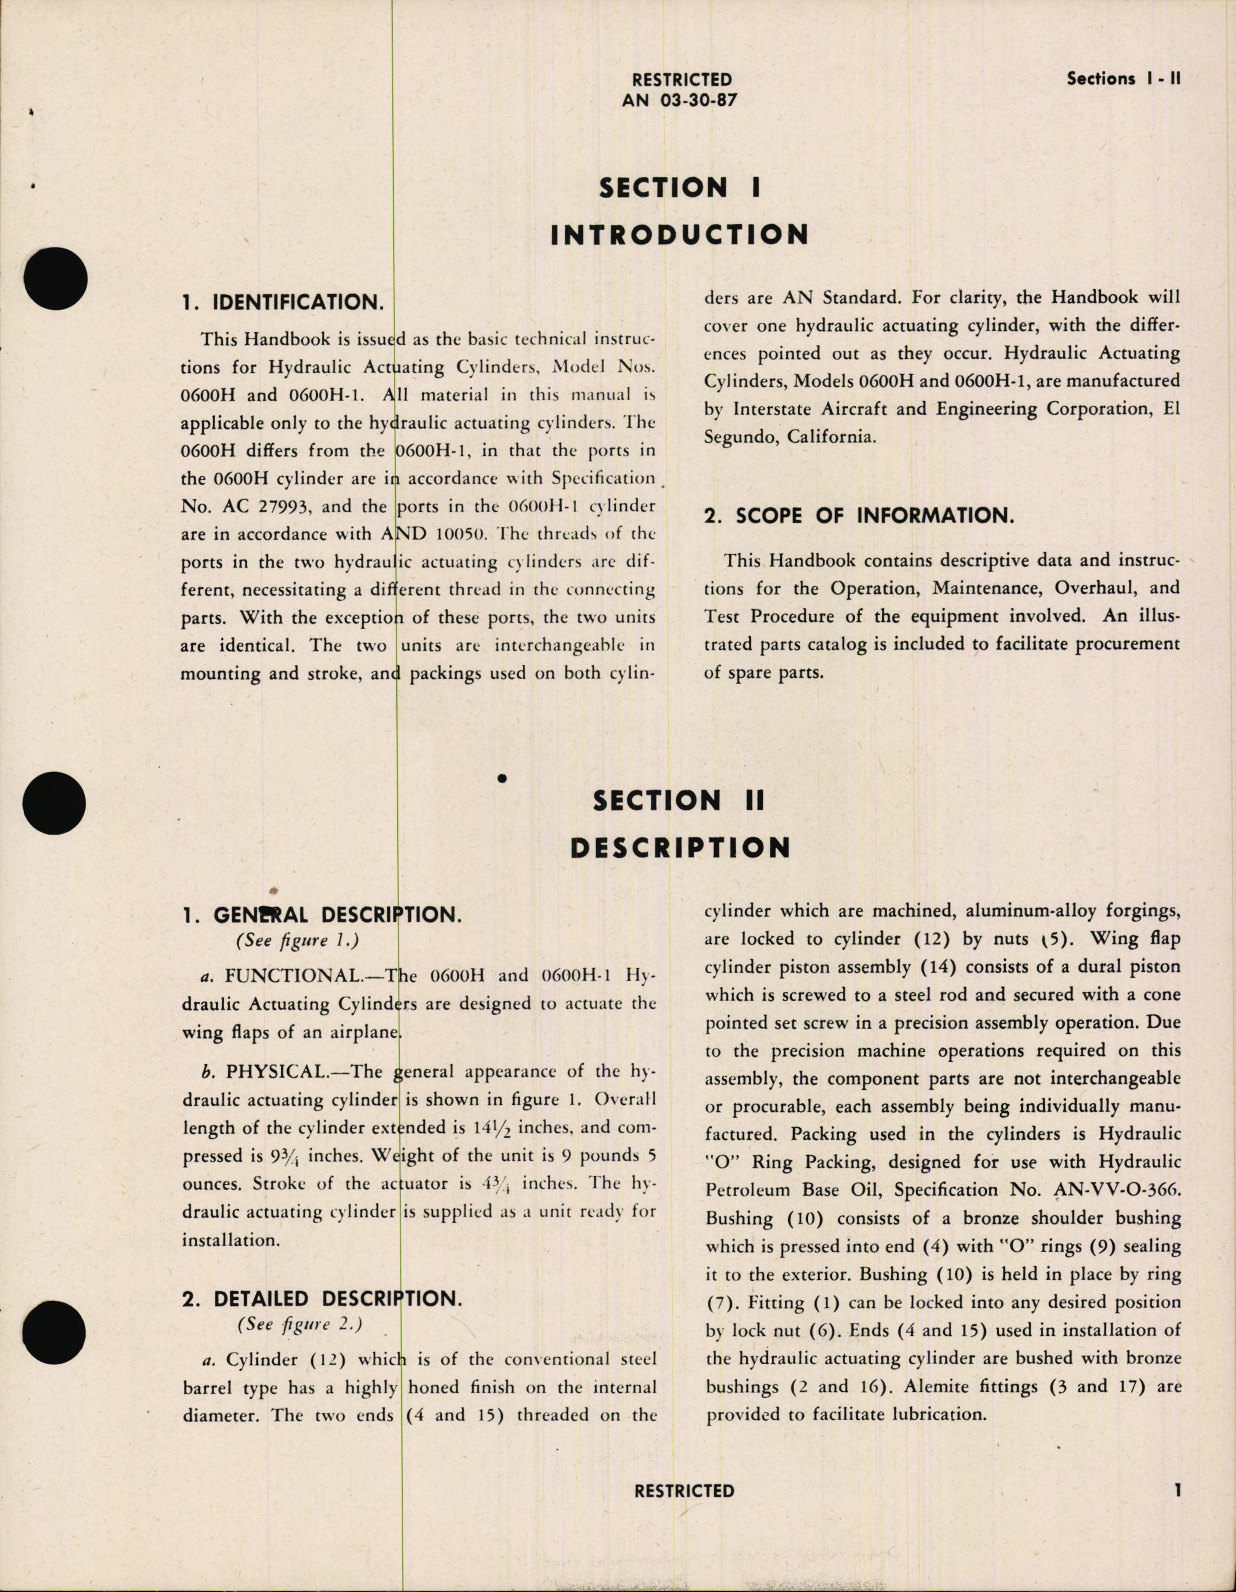 Sample page 5 from AirCorps Library document: Handbook of Instructions with Parts Catalog for Models 0600H and 0600H-1 Hydraulic Actuating Cylinders